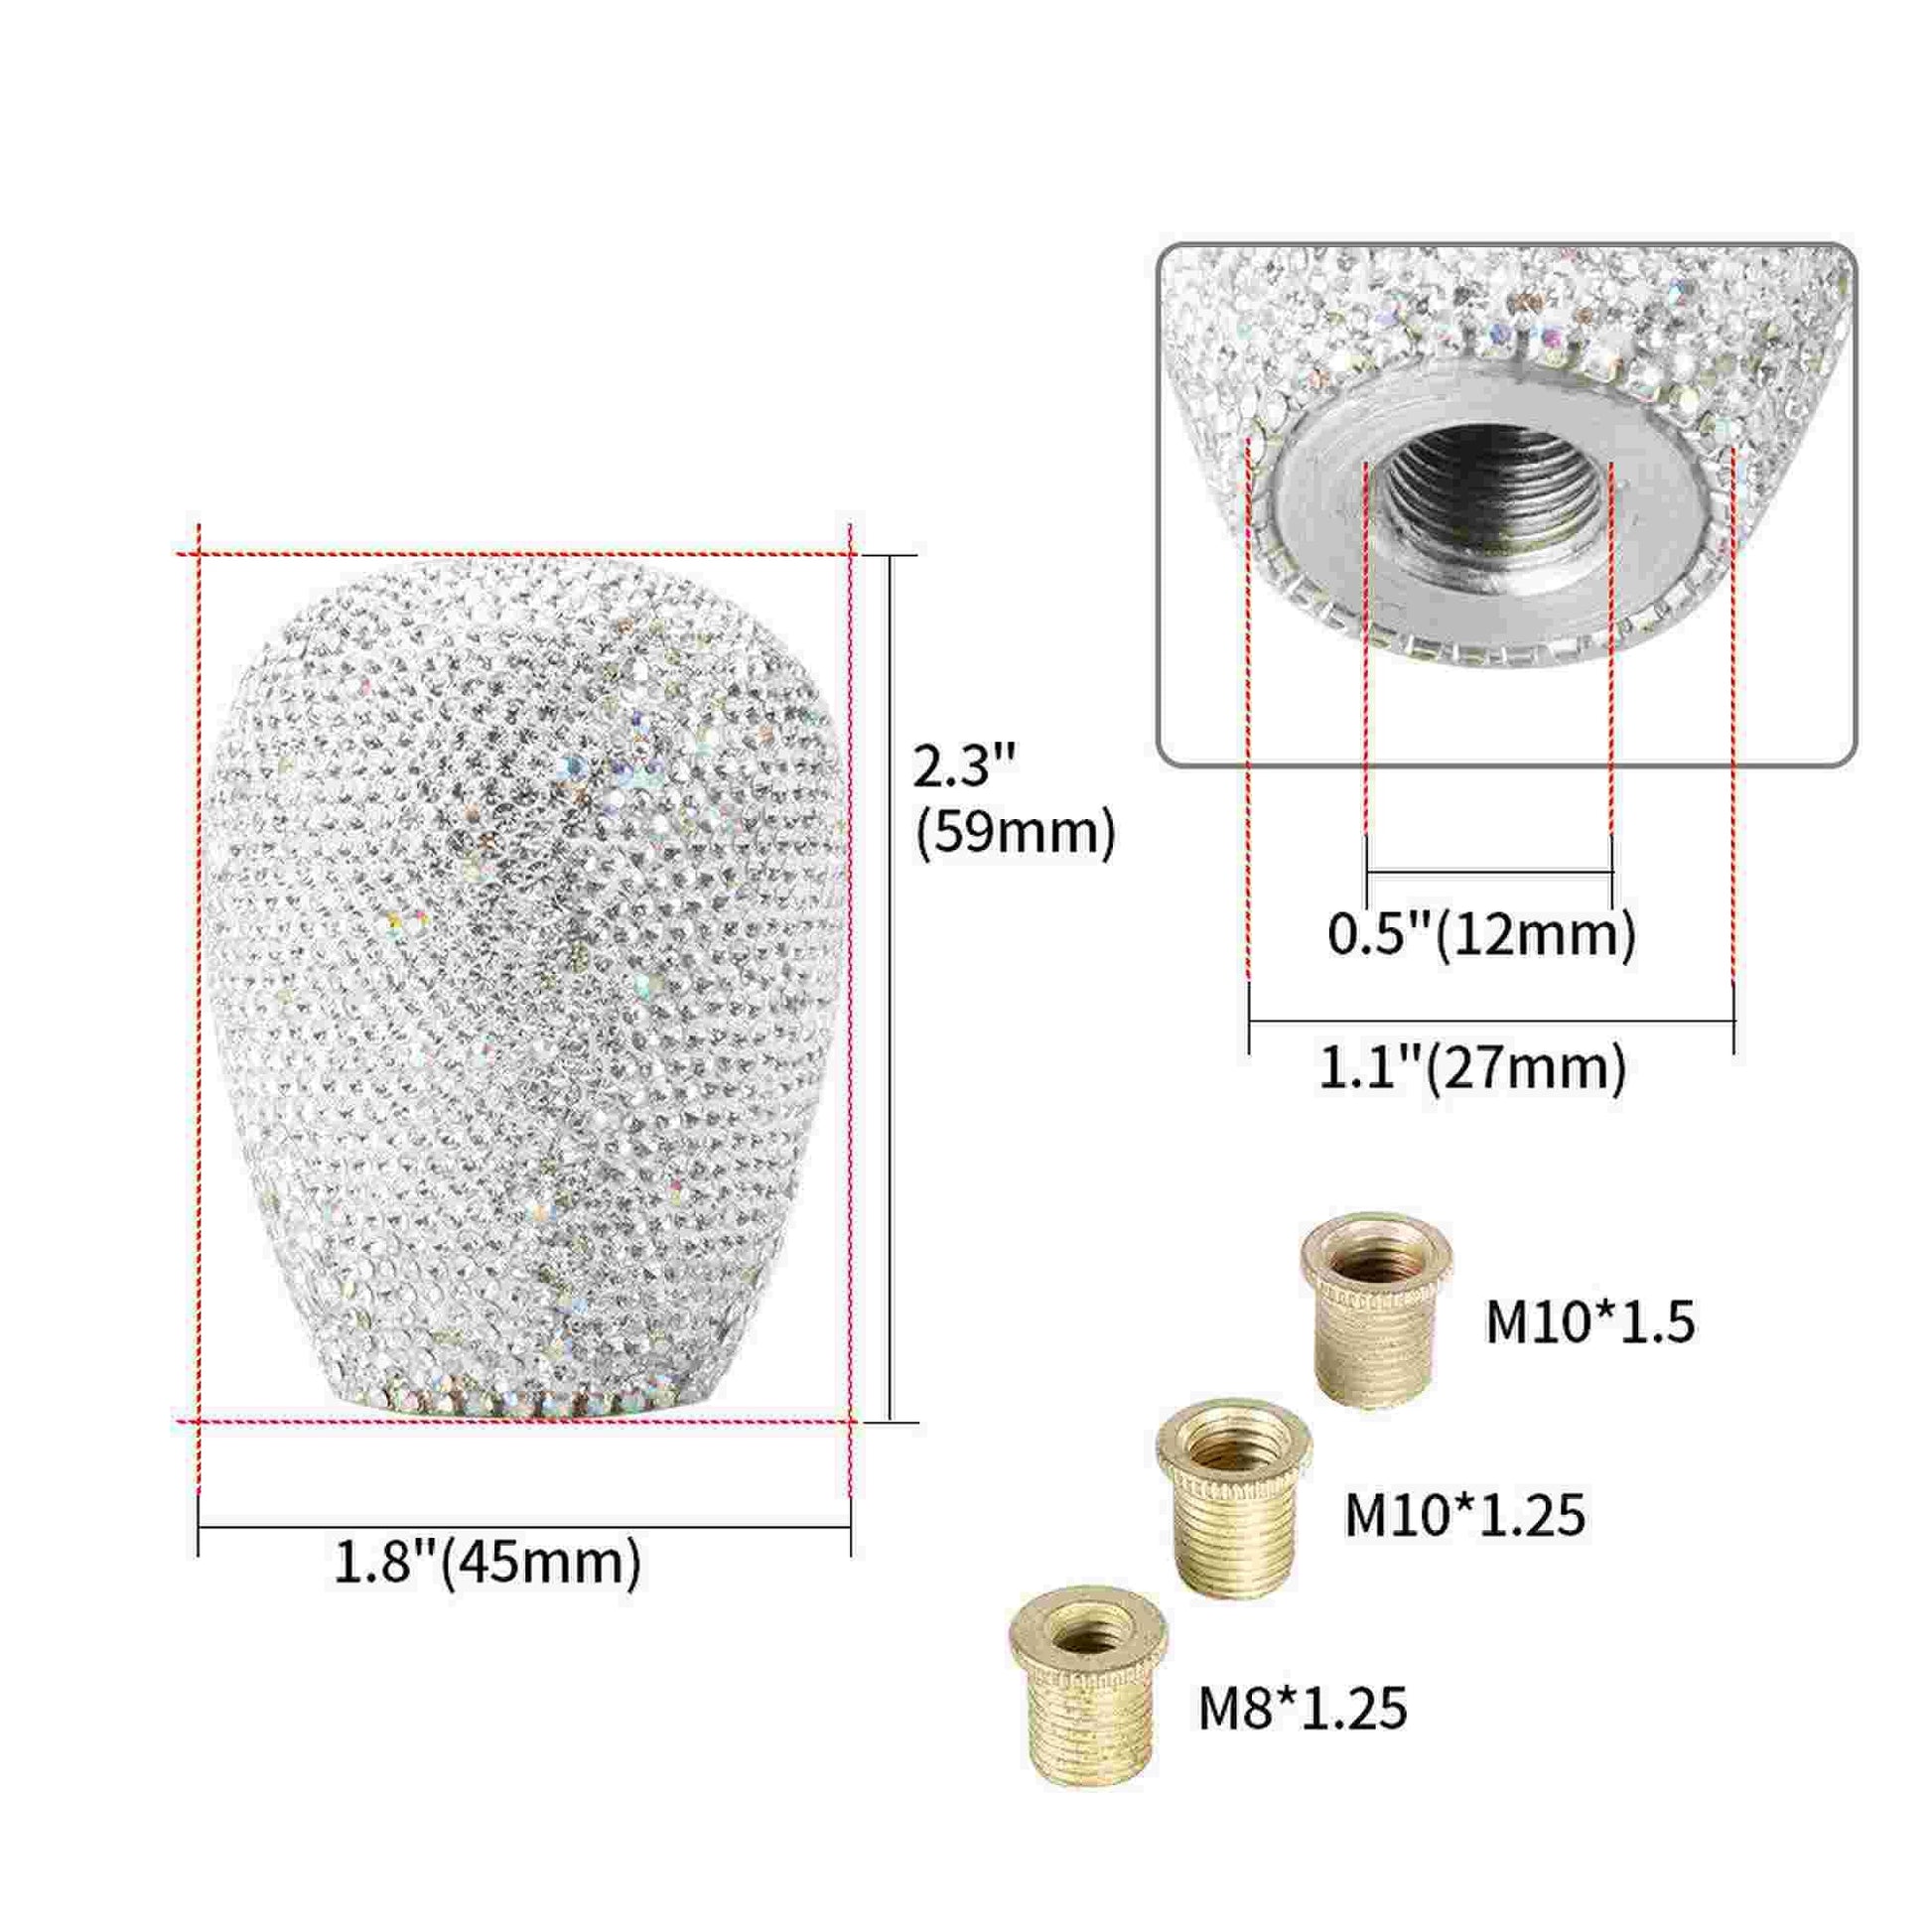 RASTP Universal Bling Gear Shift Knob with Crystal Diamond for Manual/Automatic Transmission - RASTP